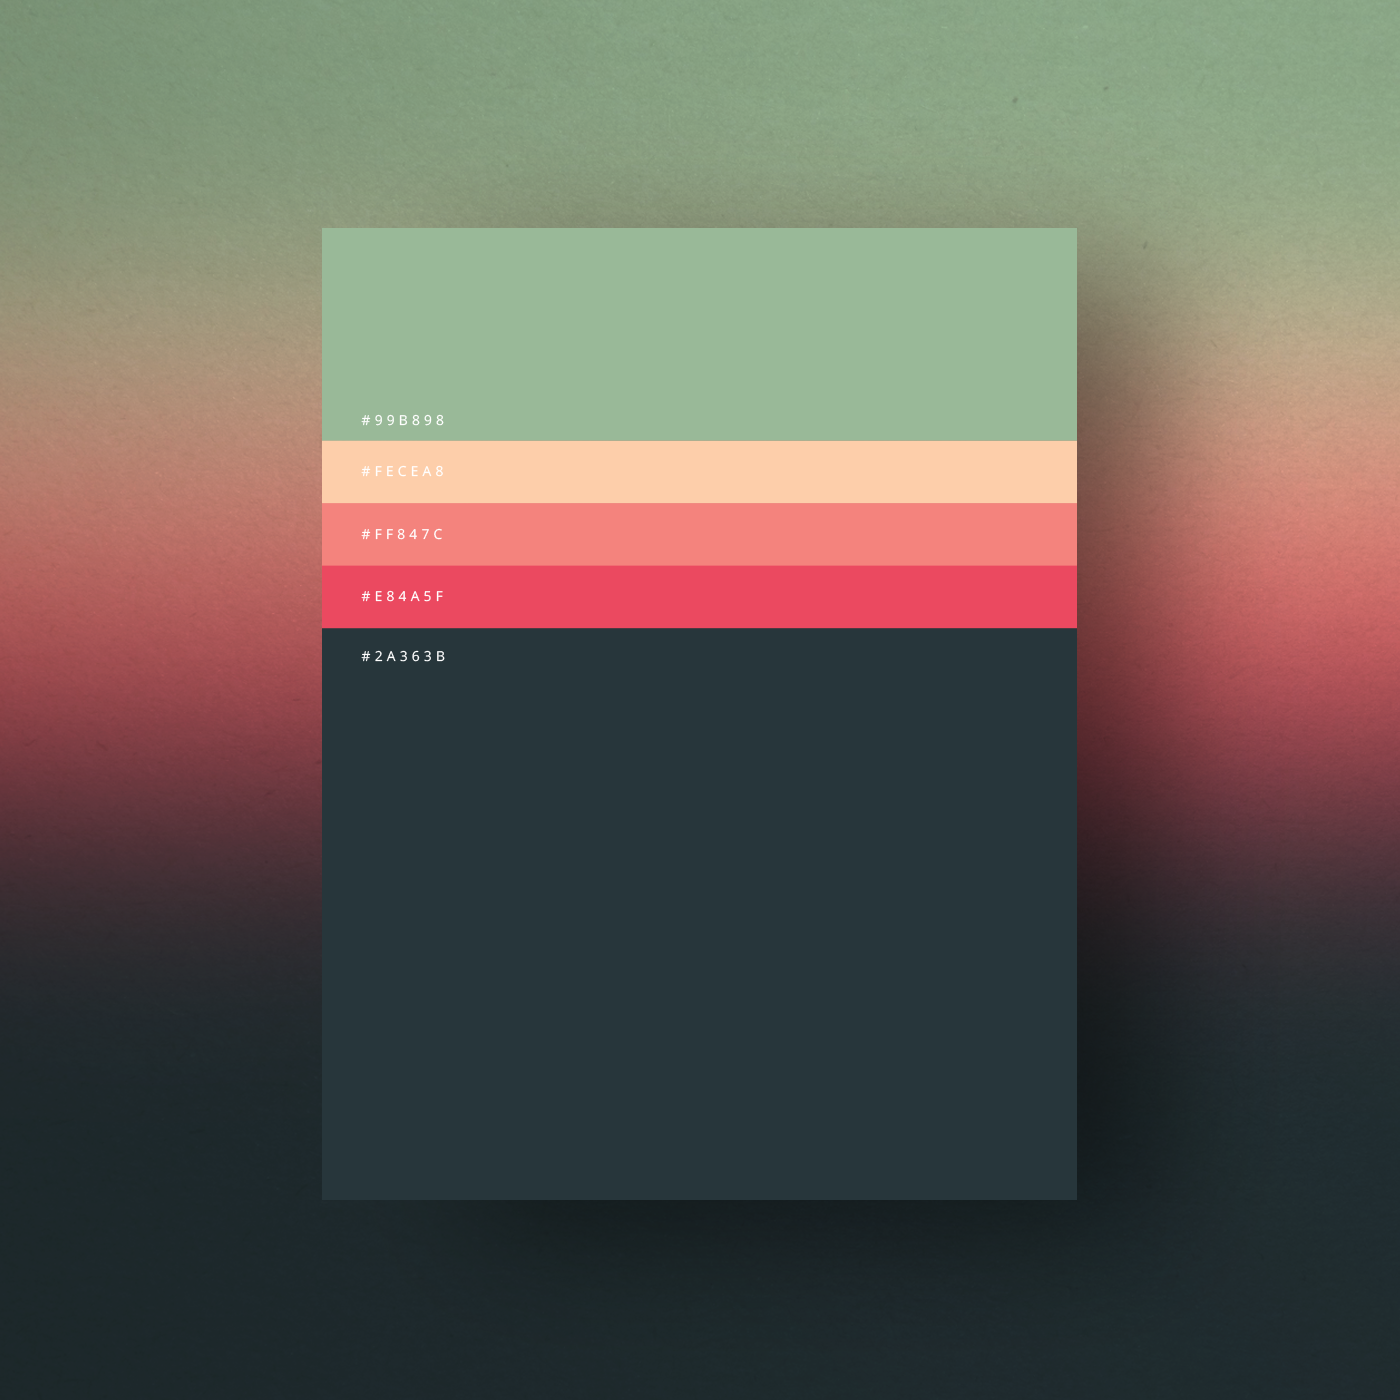 8 Beautiful Flat Color Palettes For Your Next Design Project